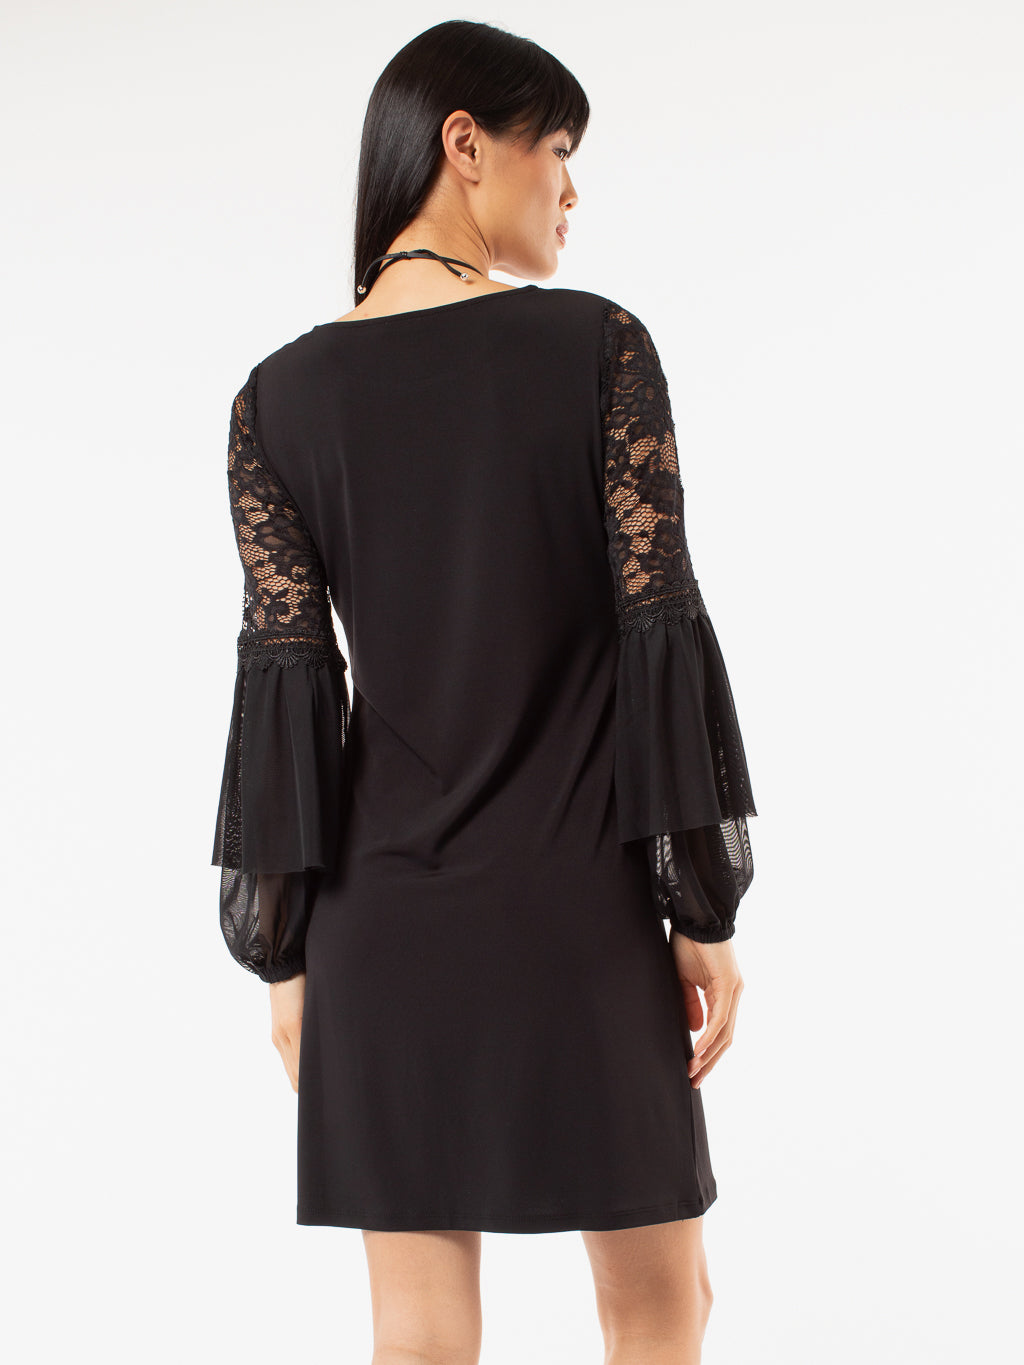 A-line dress with lace